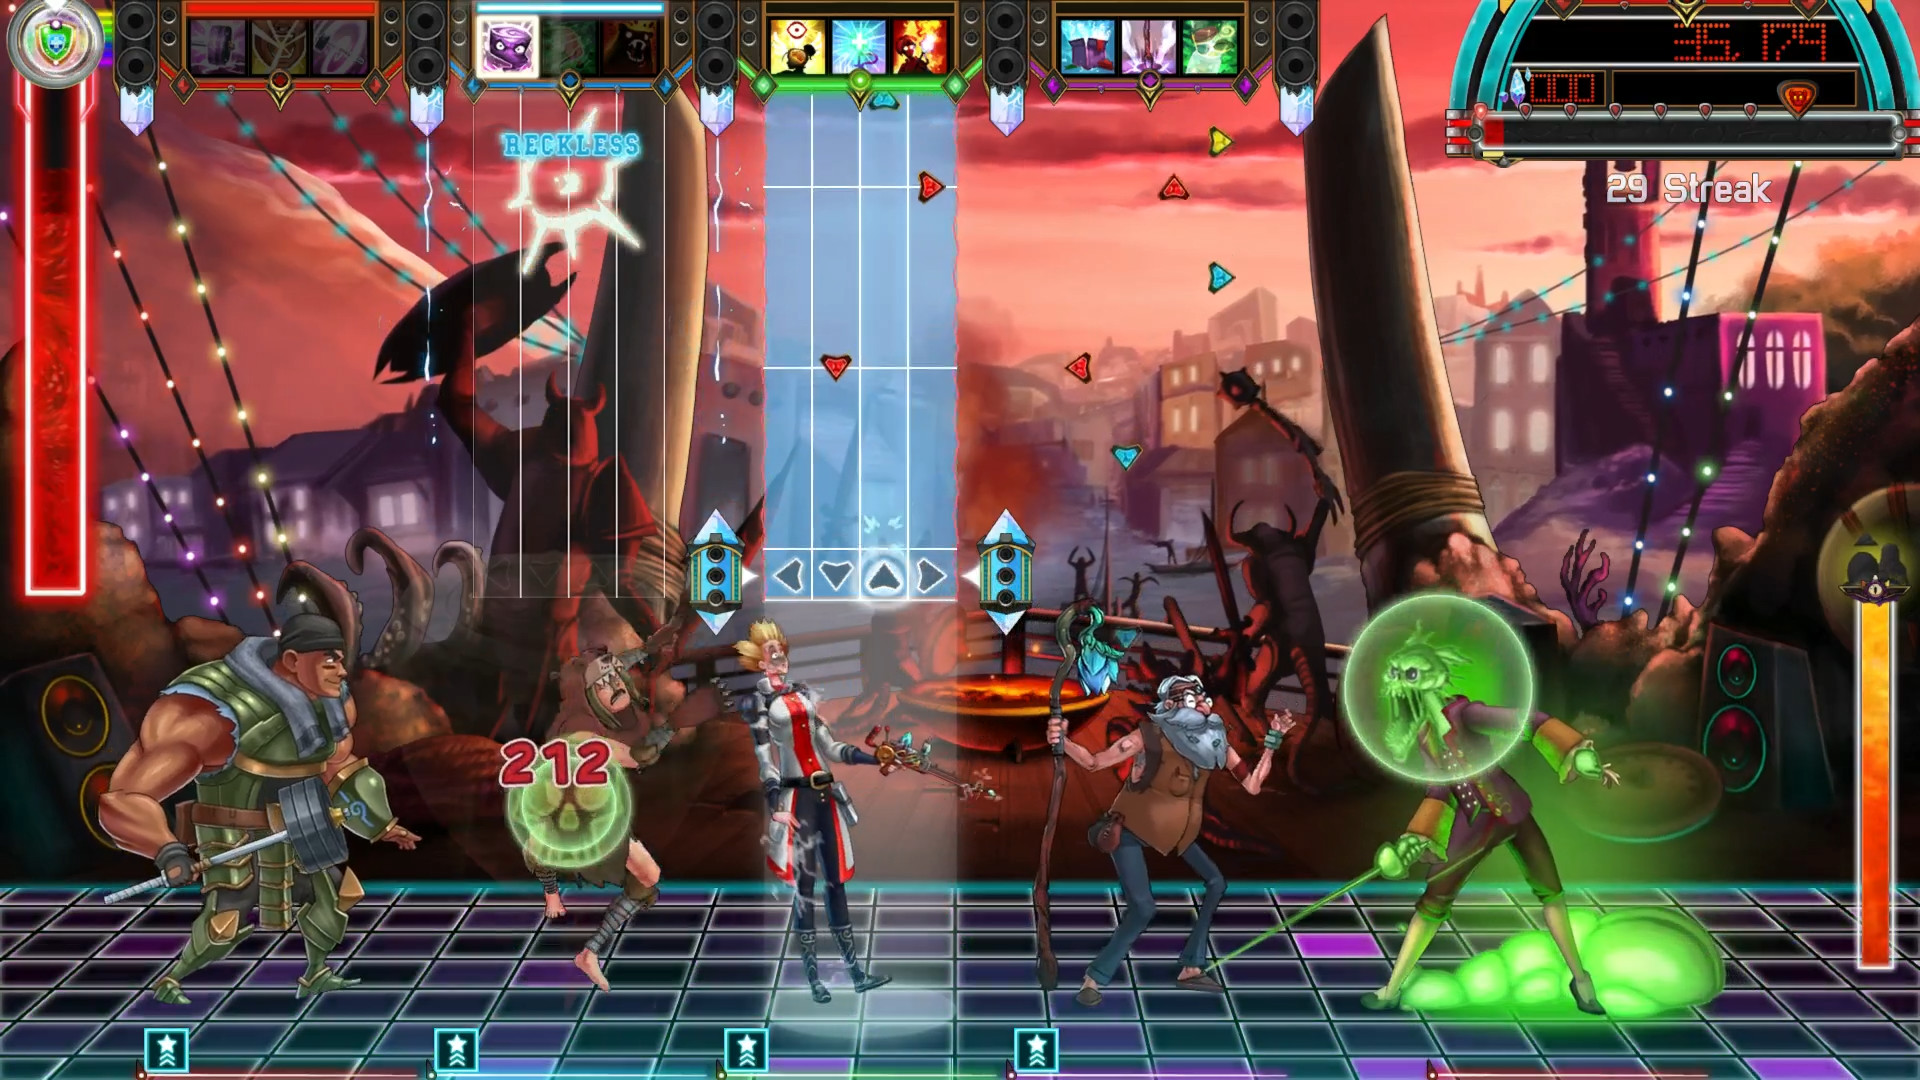 The Metronomicon download the last version for apple